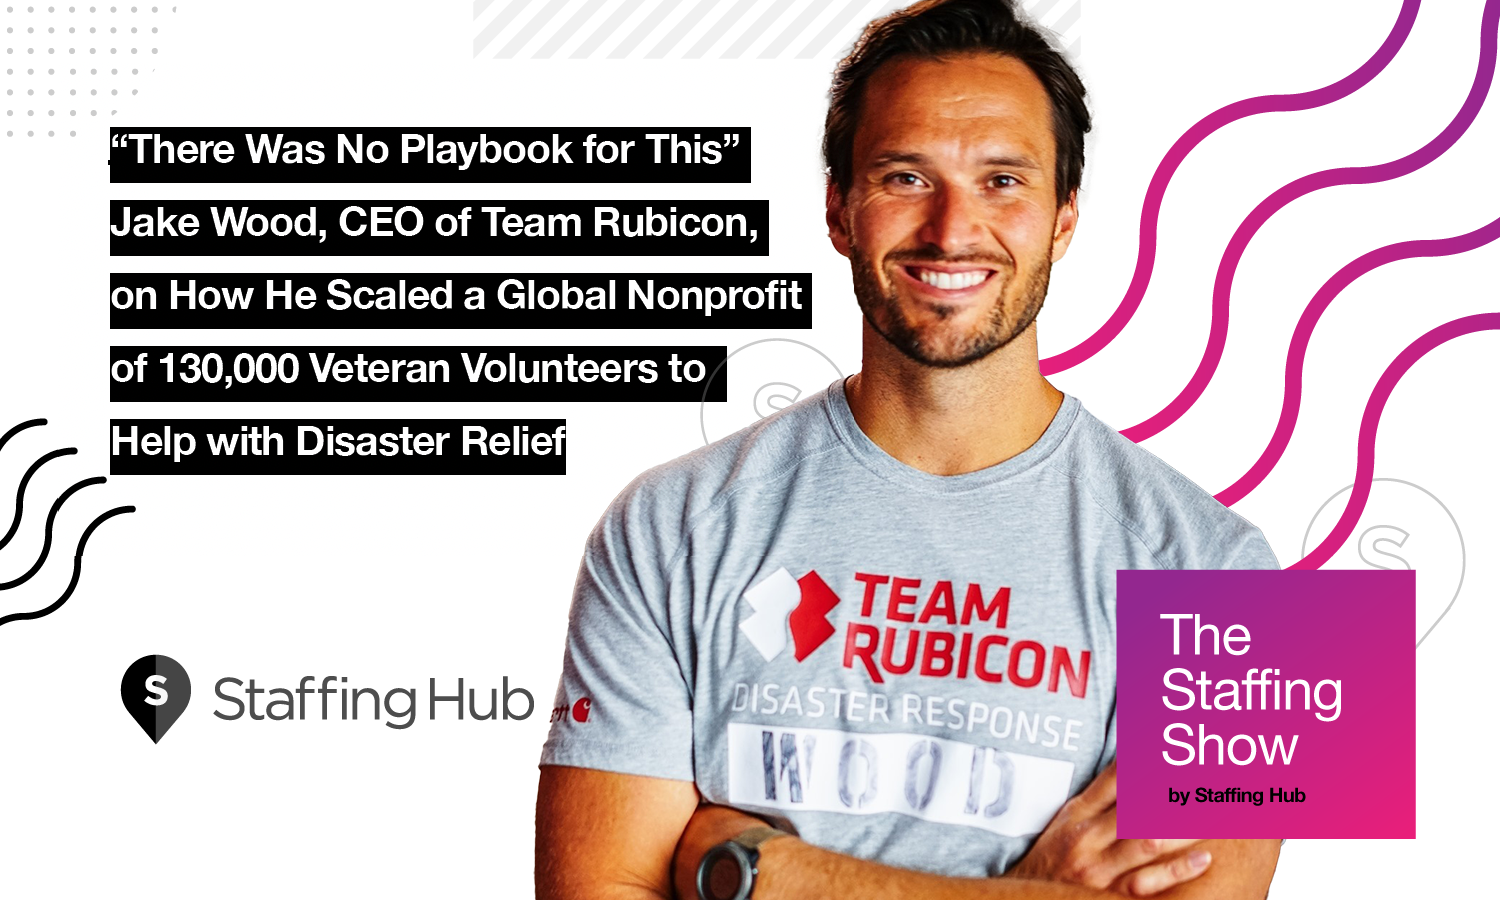 There Was No Playbook for This” -- Jake Wood, CEO of Team Rubicon, on How He Scaled a Global Nonprofit of 130,000 Veteran Volunteers to Help with Disaster Relief